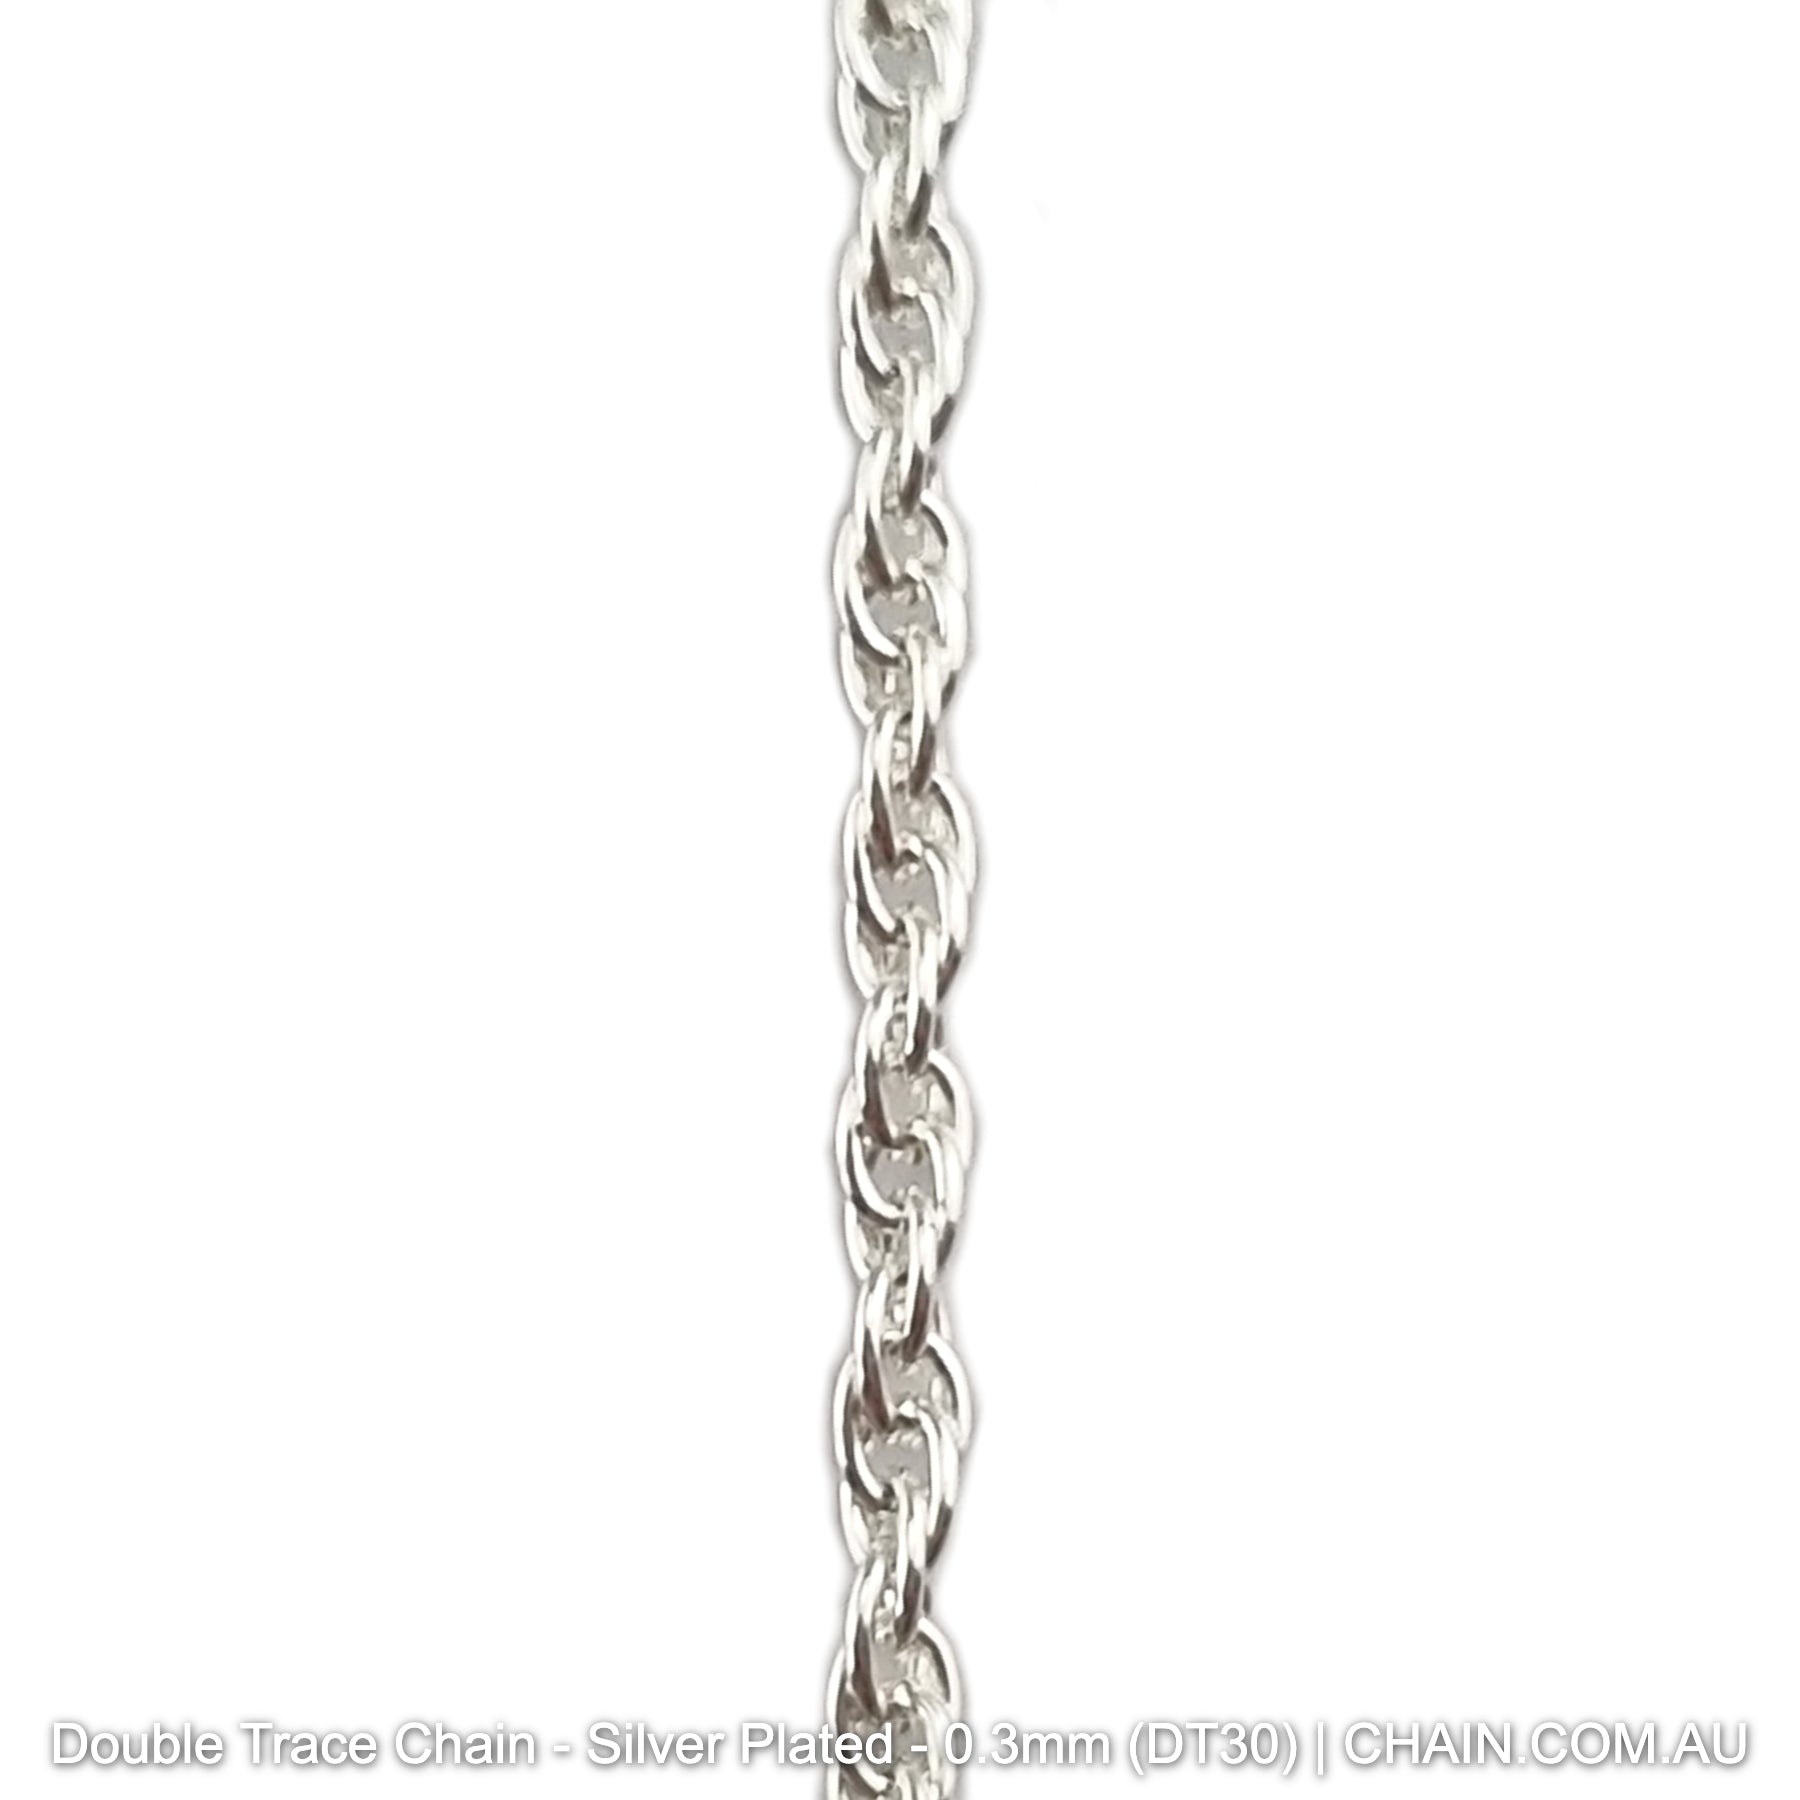 Double Trace Chain - Silver Plated. Size: 0.3mm x 25m. Shop jewellery chain online. Australia wide shipping. Chain.com.au